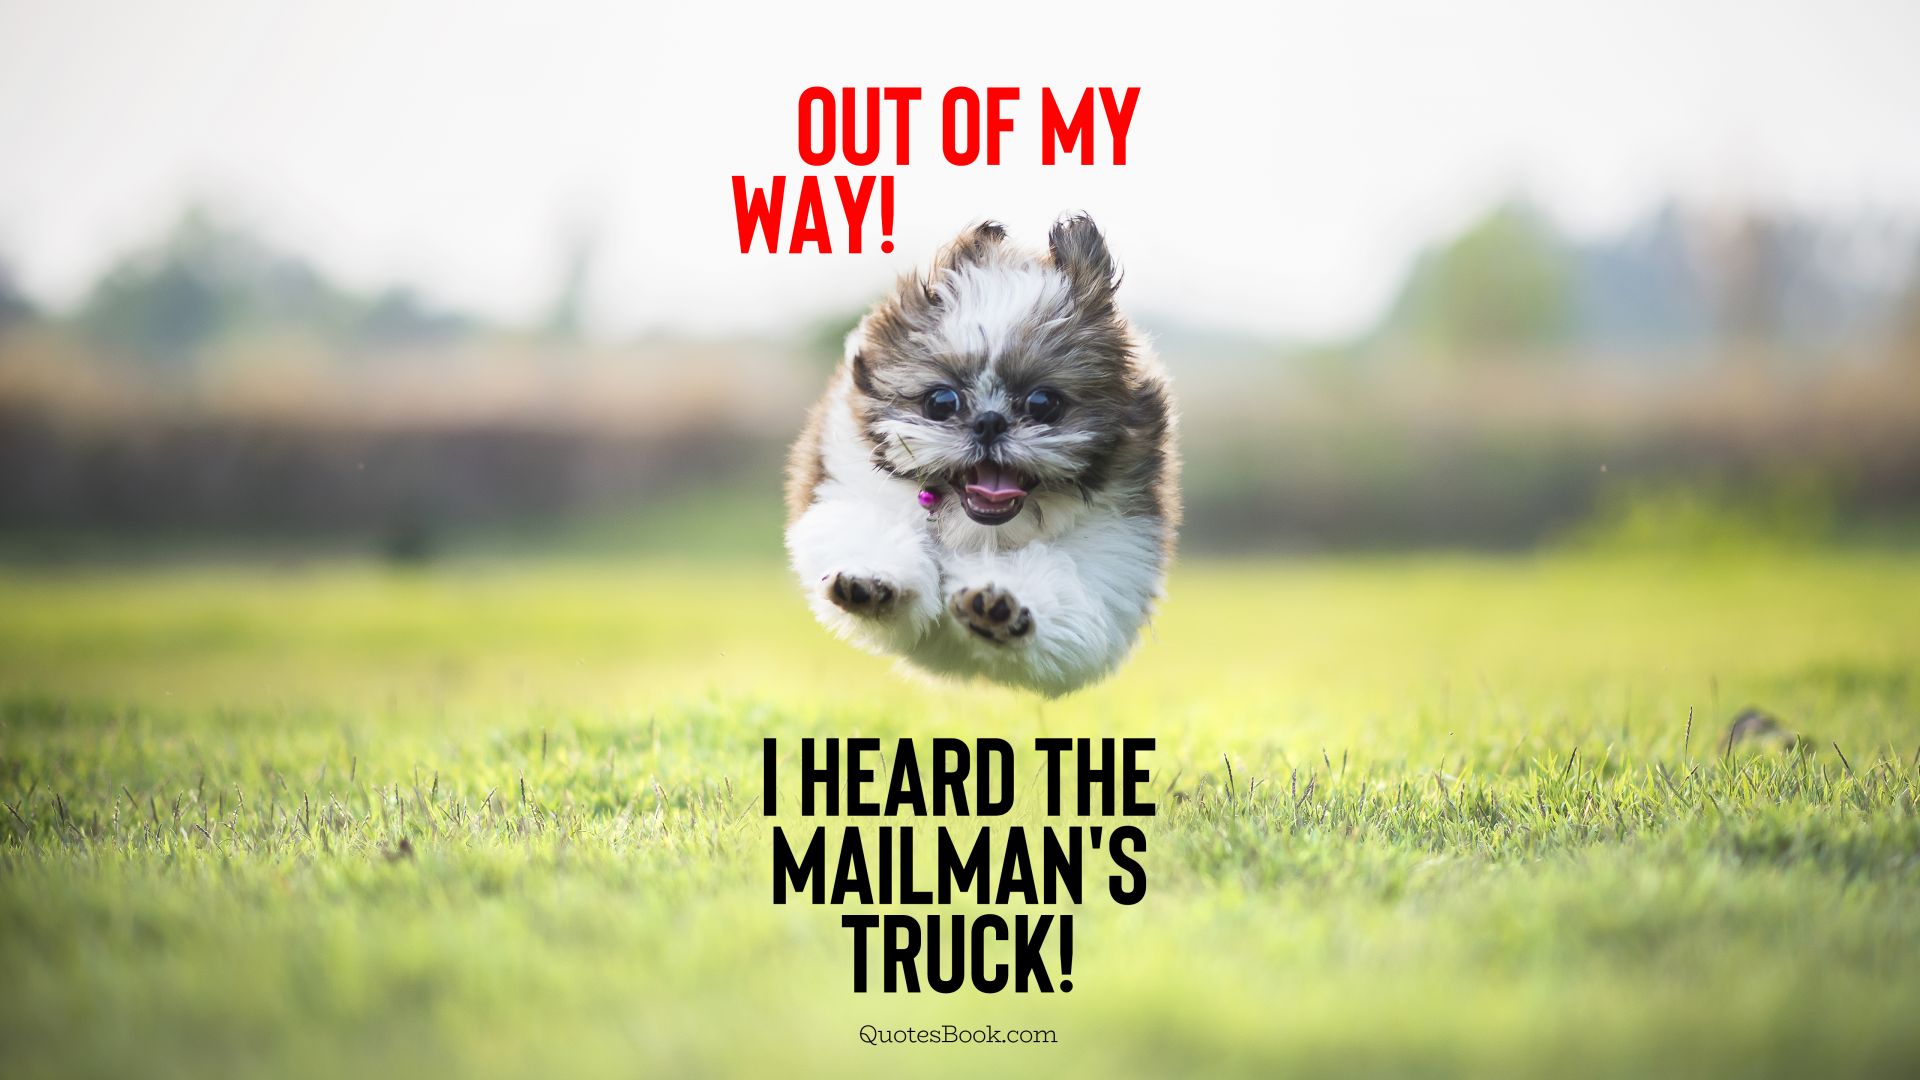 Out of my way! I heard the mailman's truck!